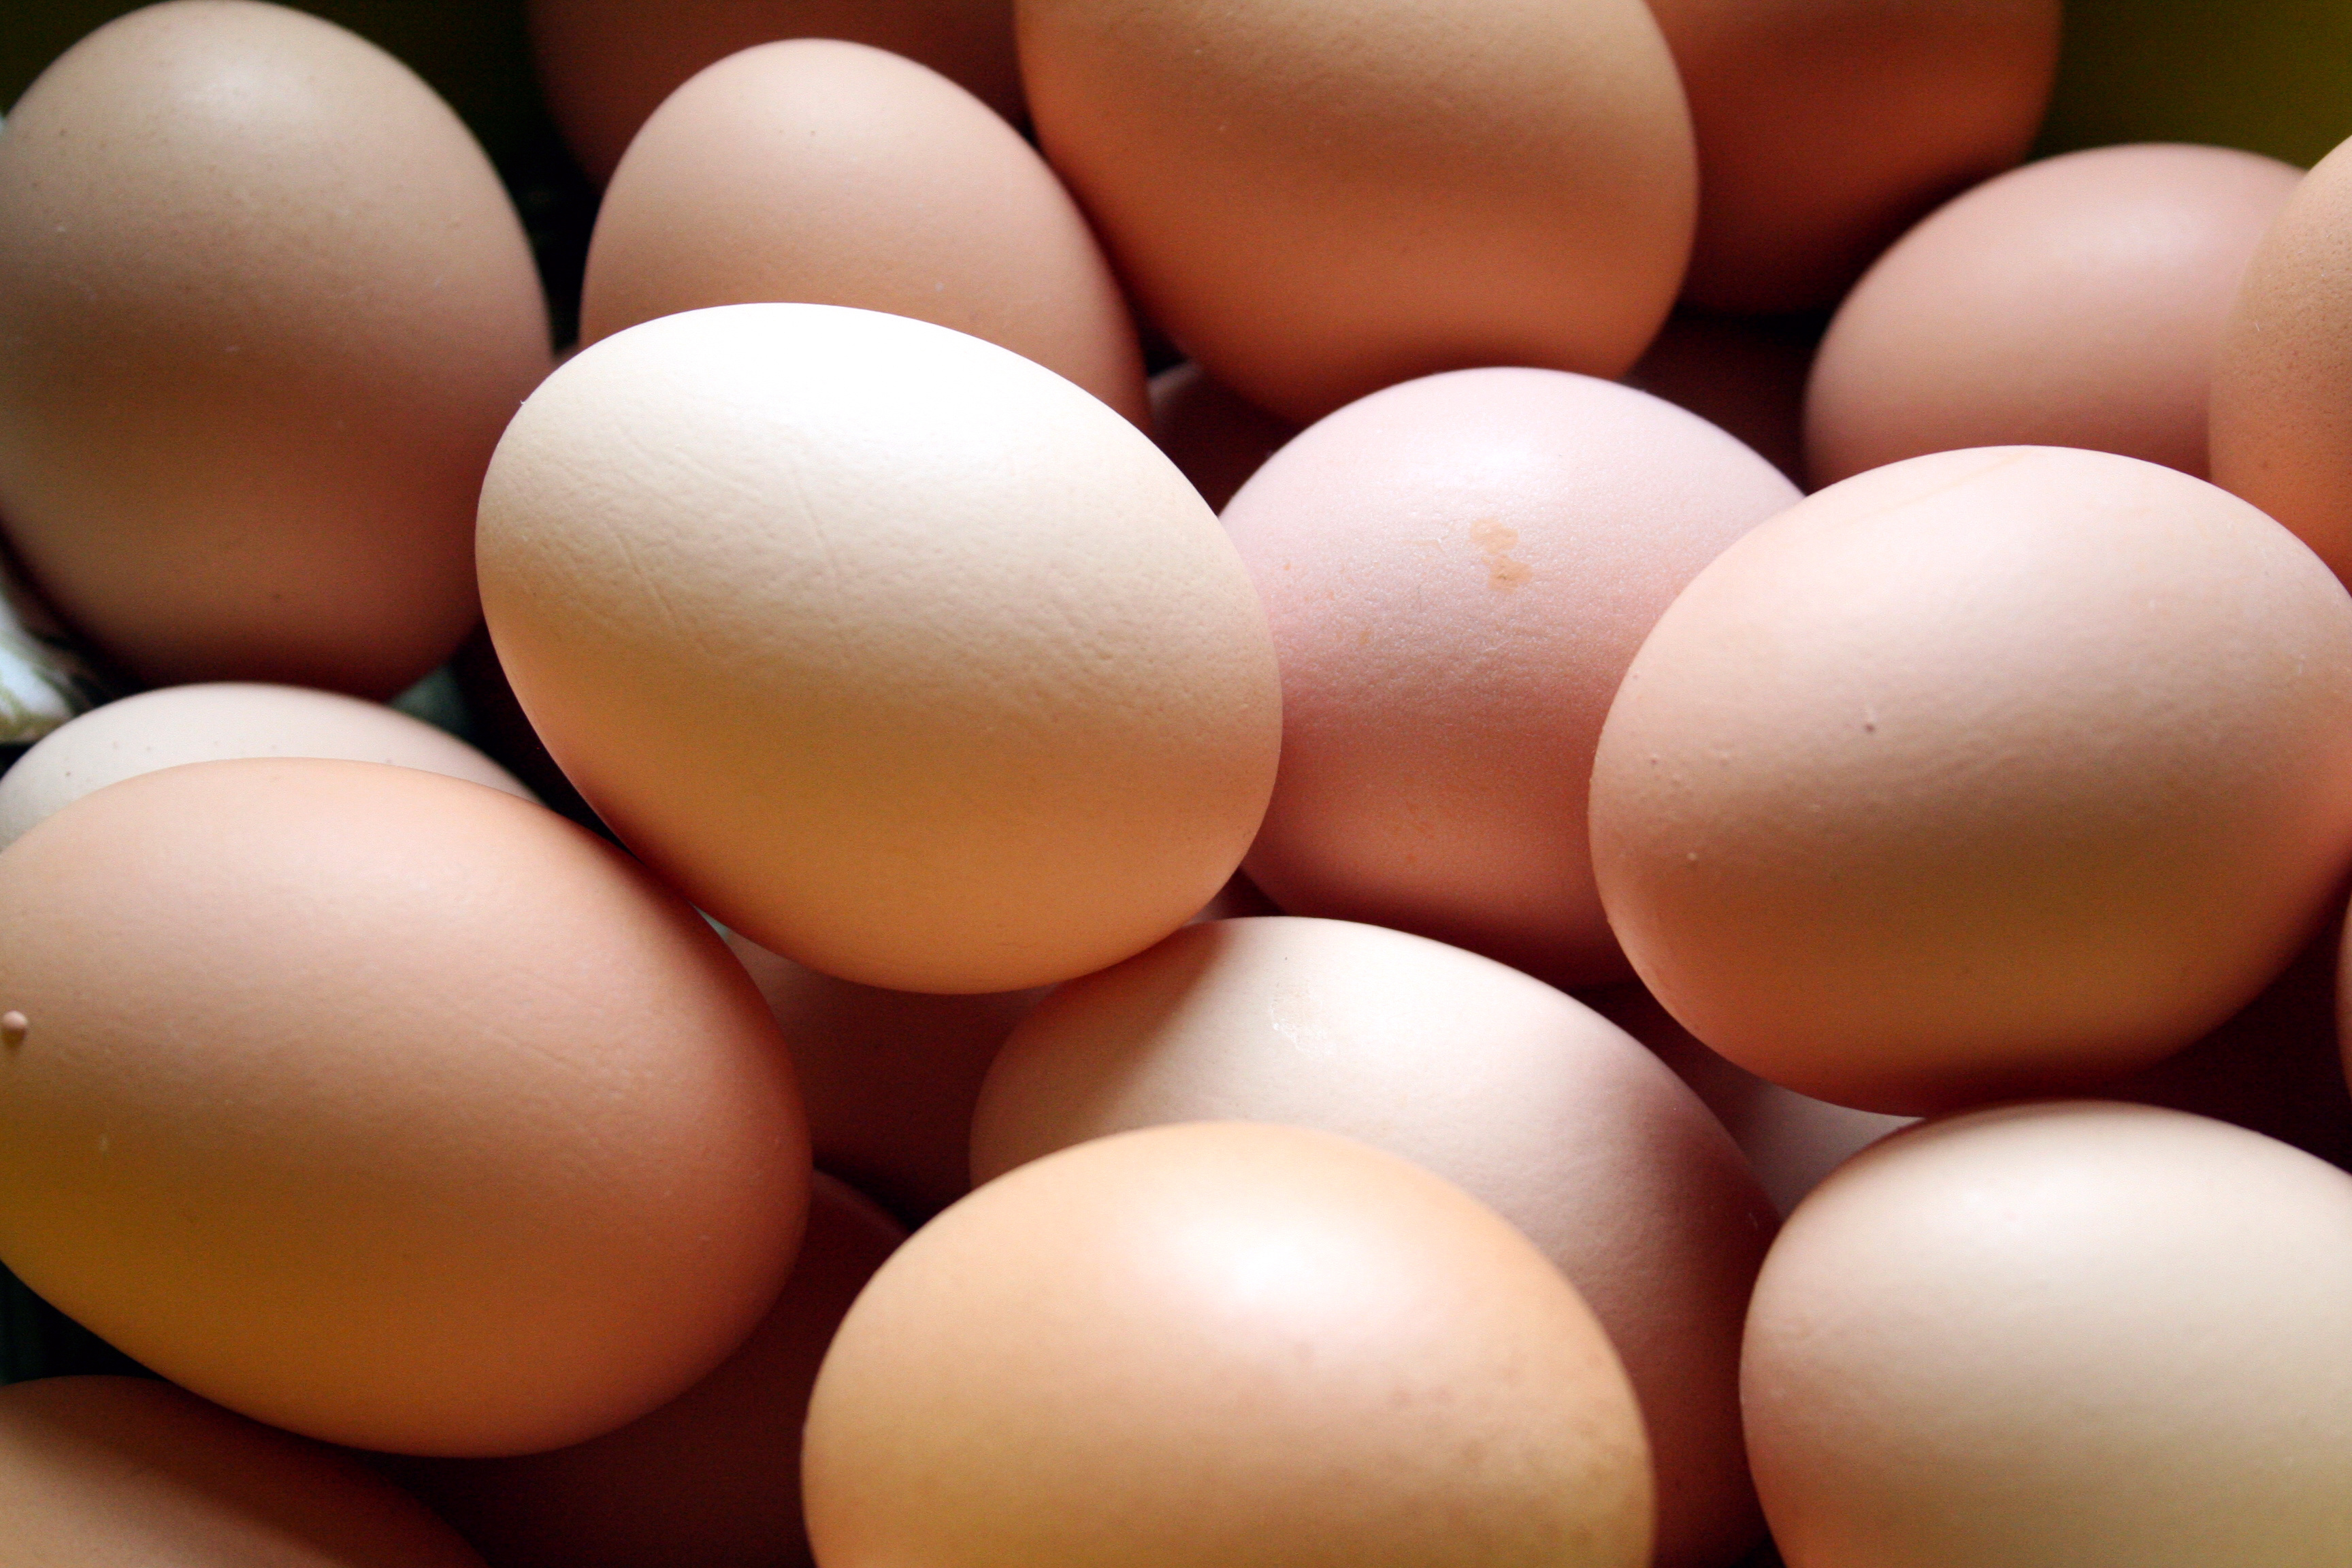 https://cdn.globalagmedia.com/poultry/articles/layers-and-eggs/eggs/eggs-2.jpeg